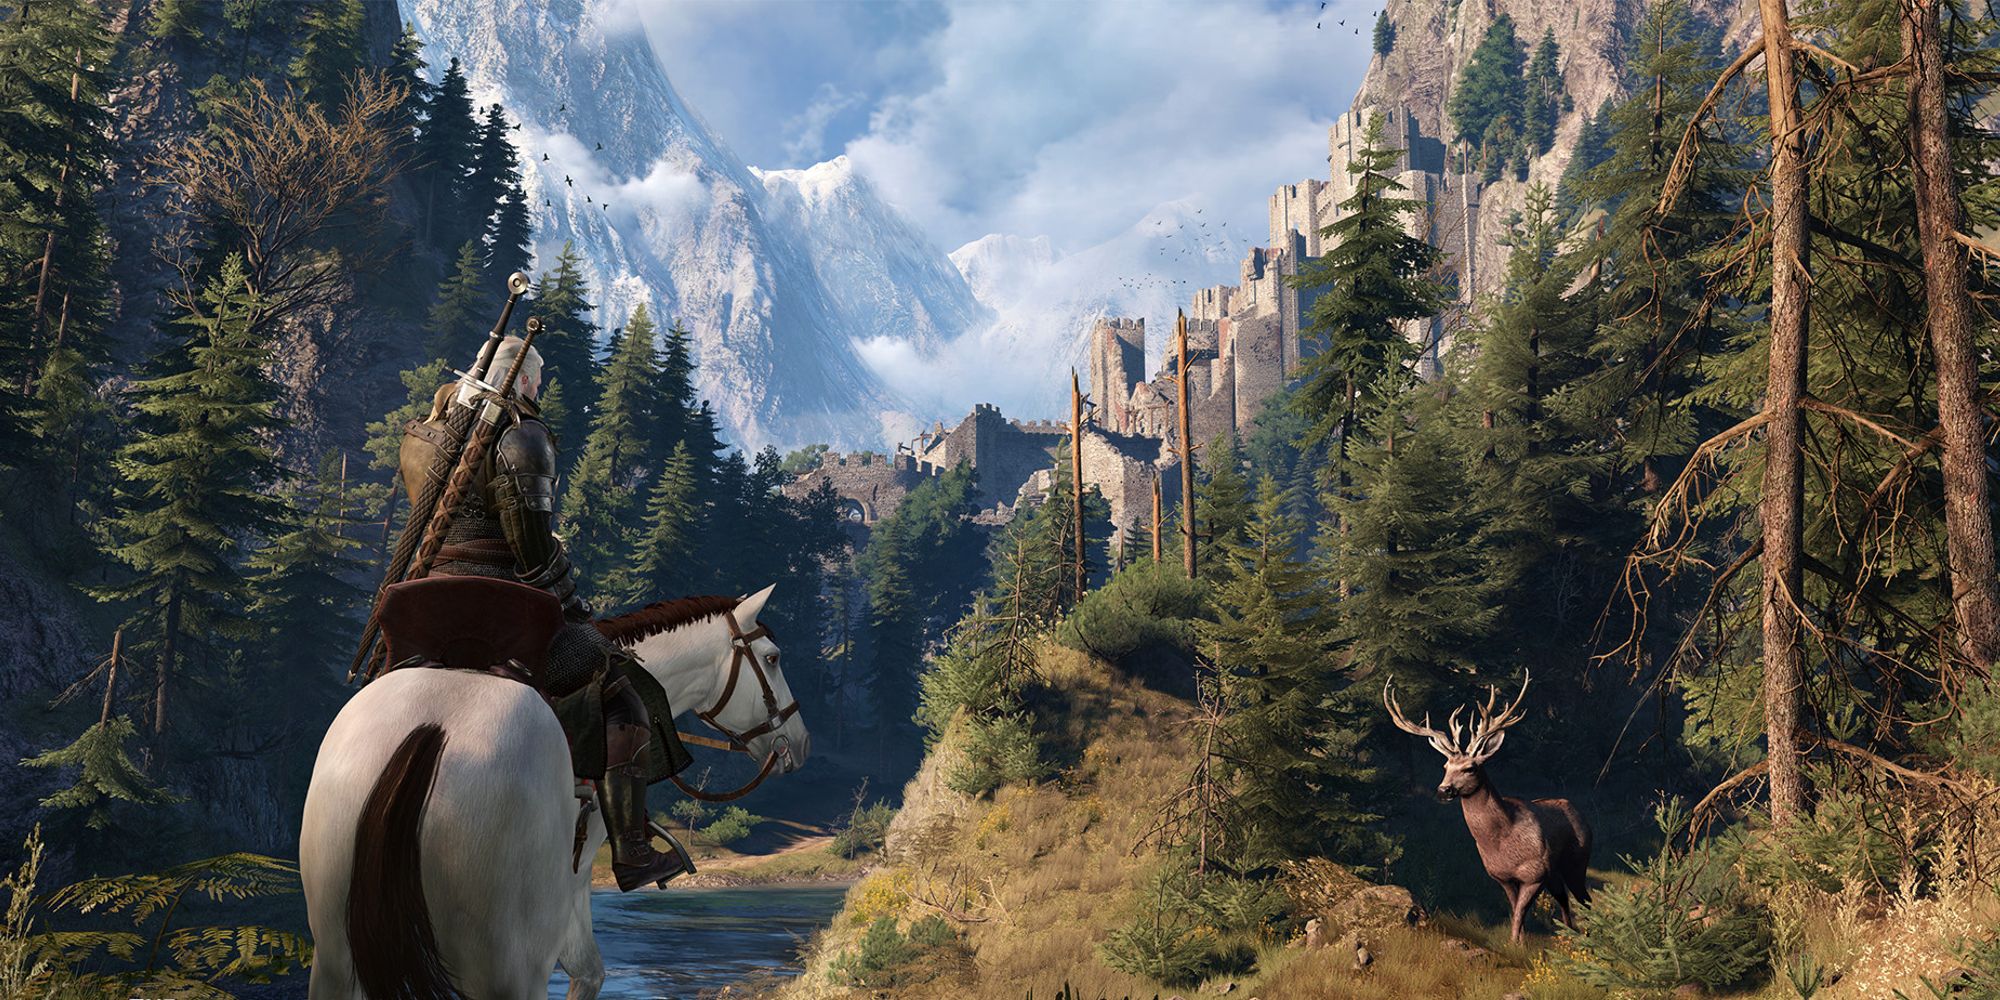 geralt riding a horse with a deer nearby